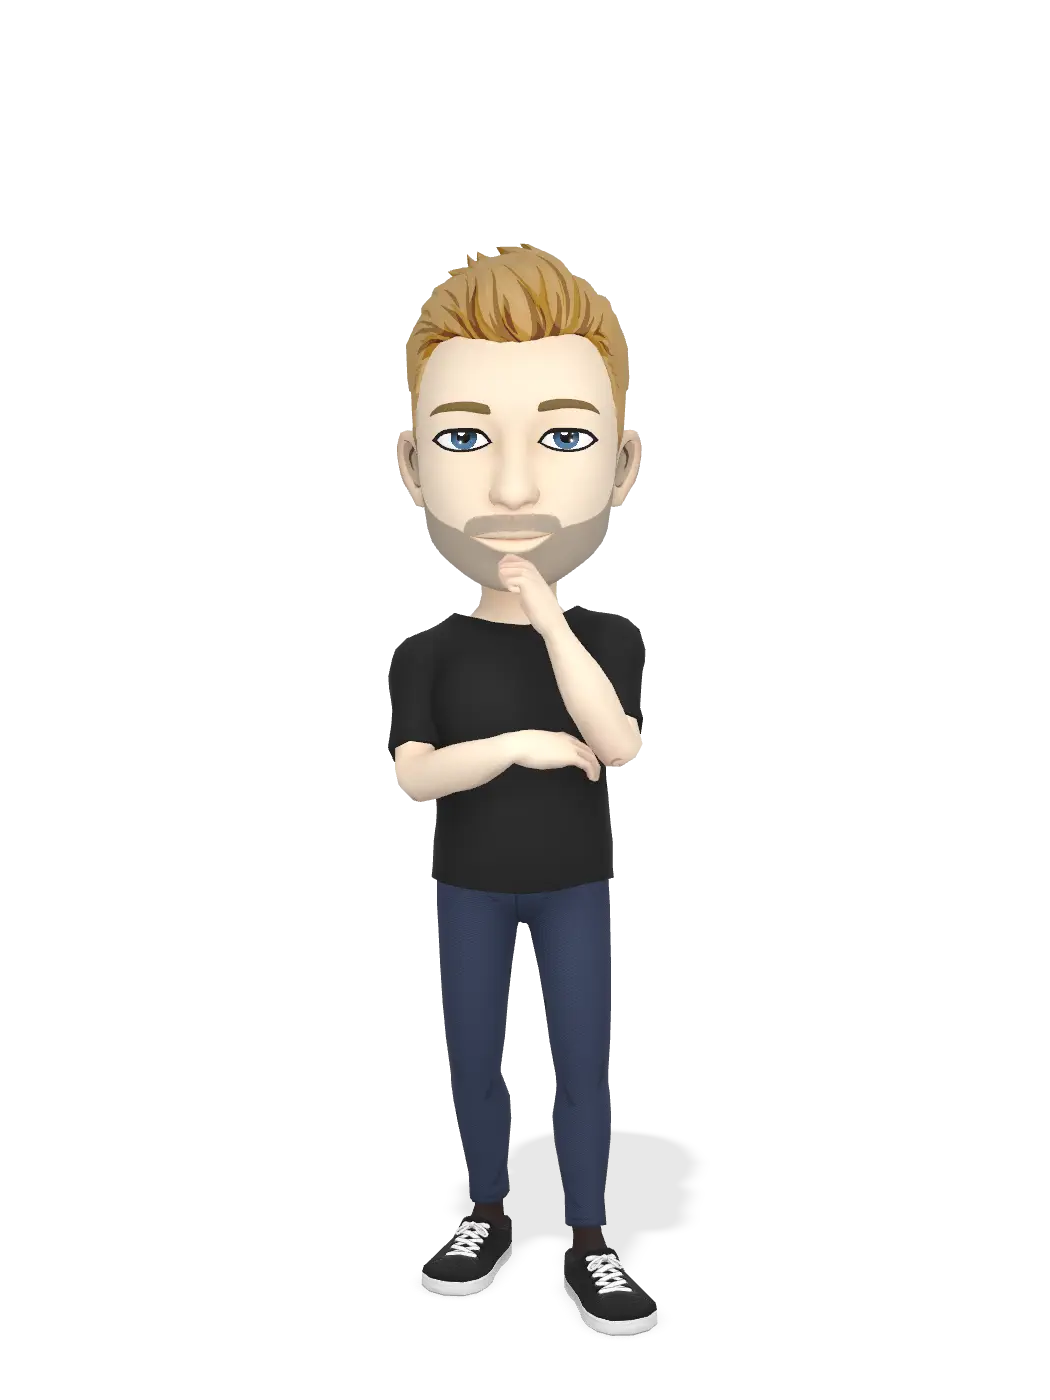 3D Bitmoji for chasejarvis